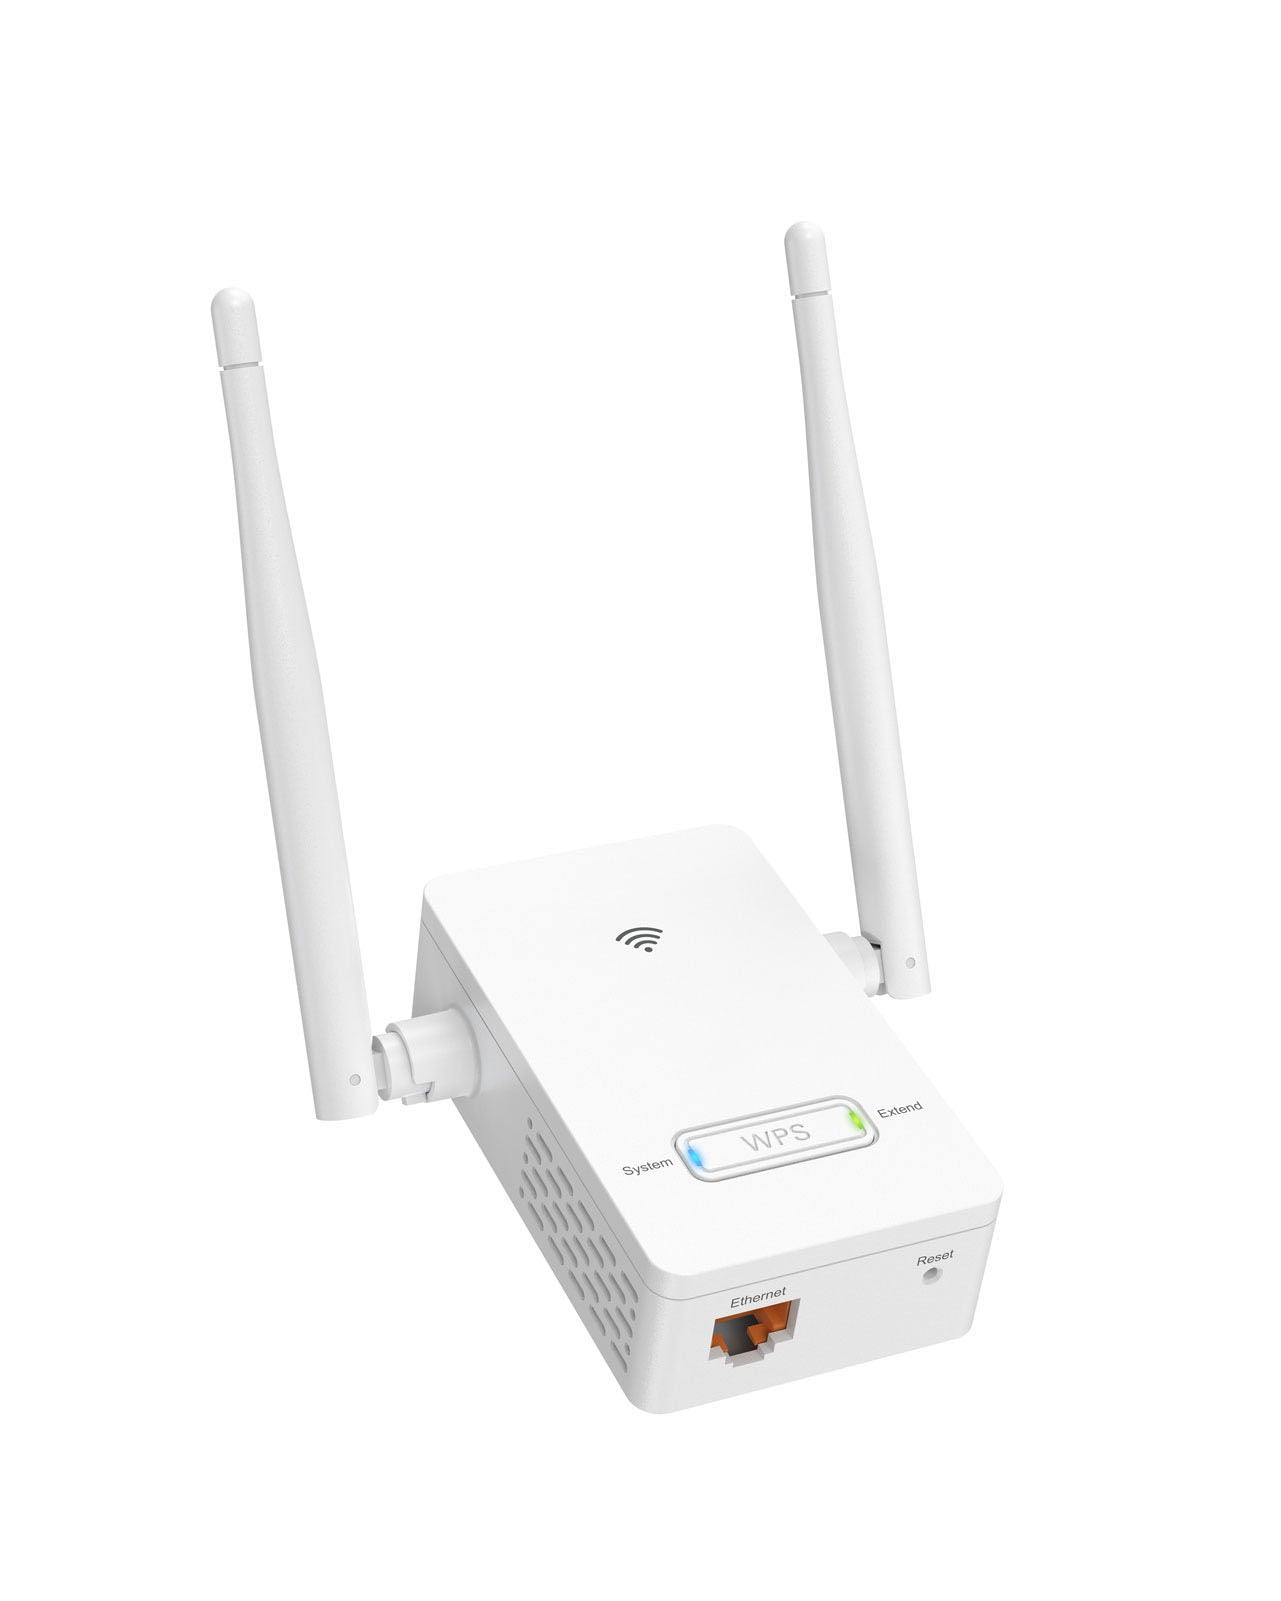 300Mbps WiFi to Ethernet Adapter Wireless Bridge